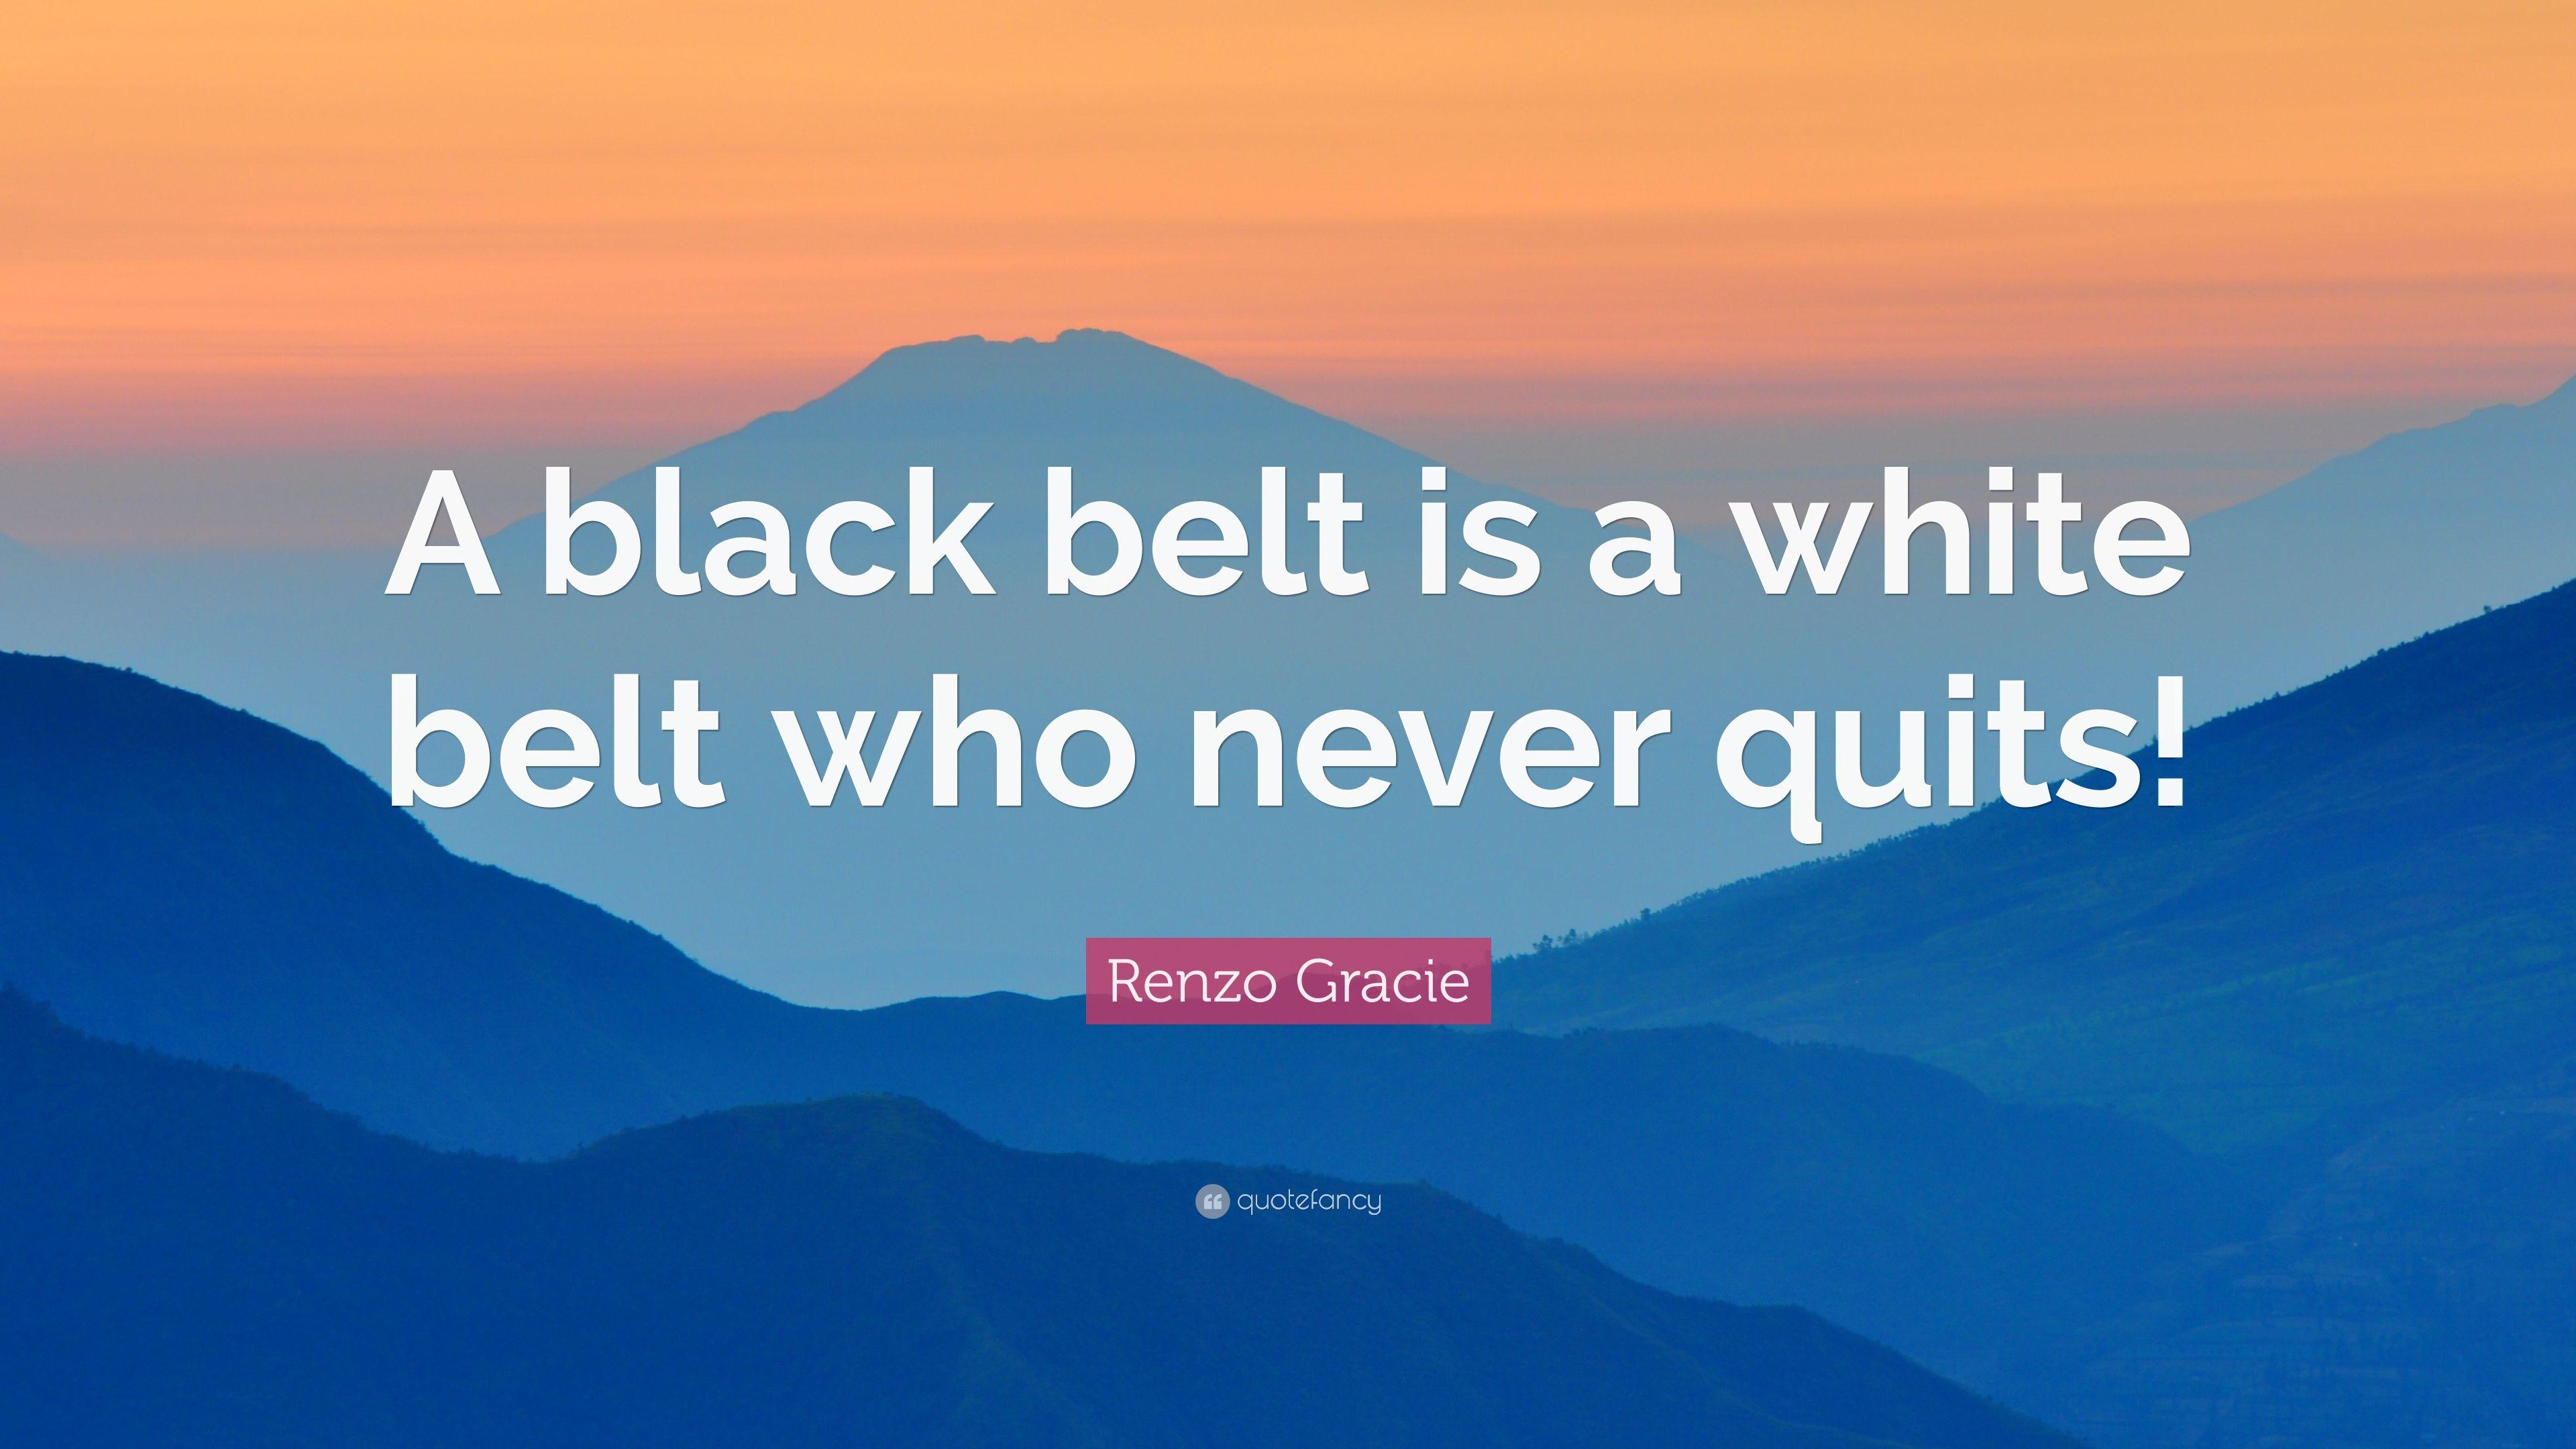 Renzo Gracie Quote: “A black belt is a white belt who never quits